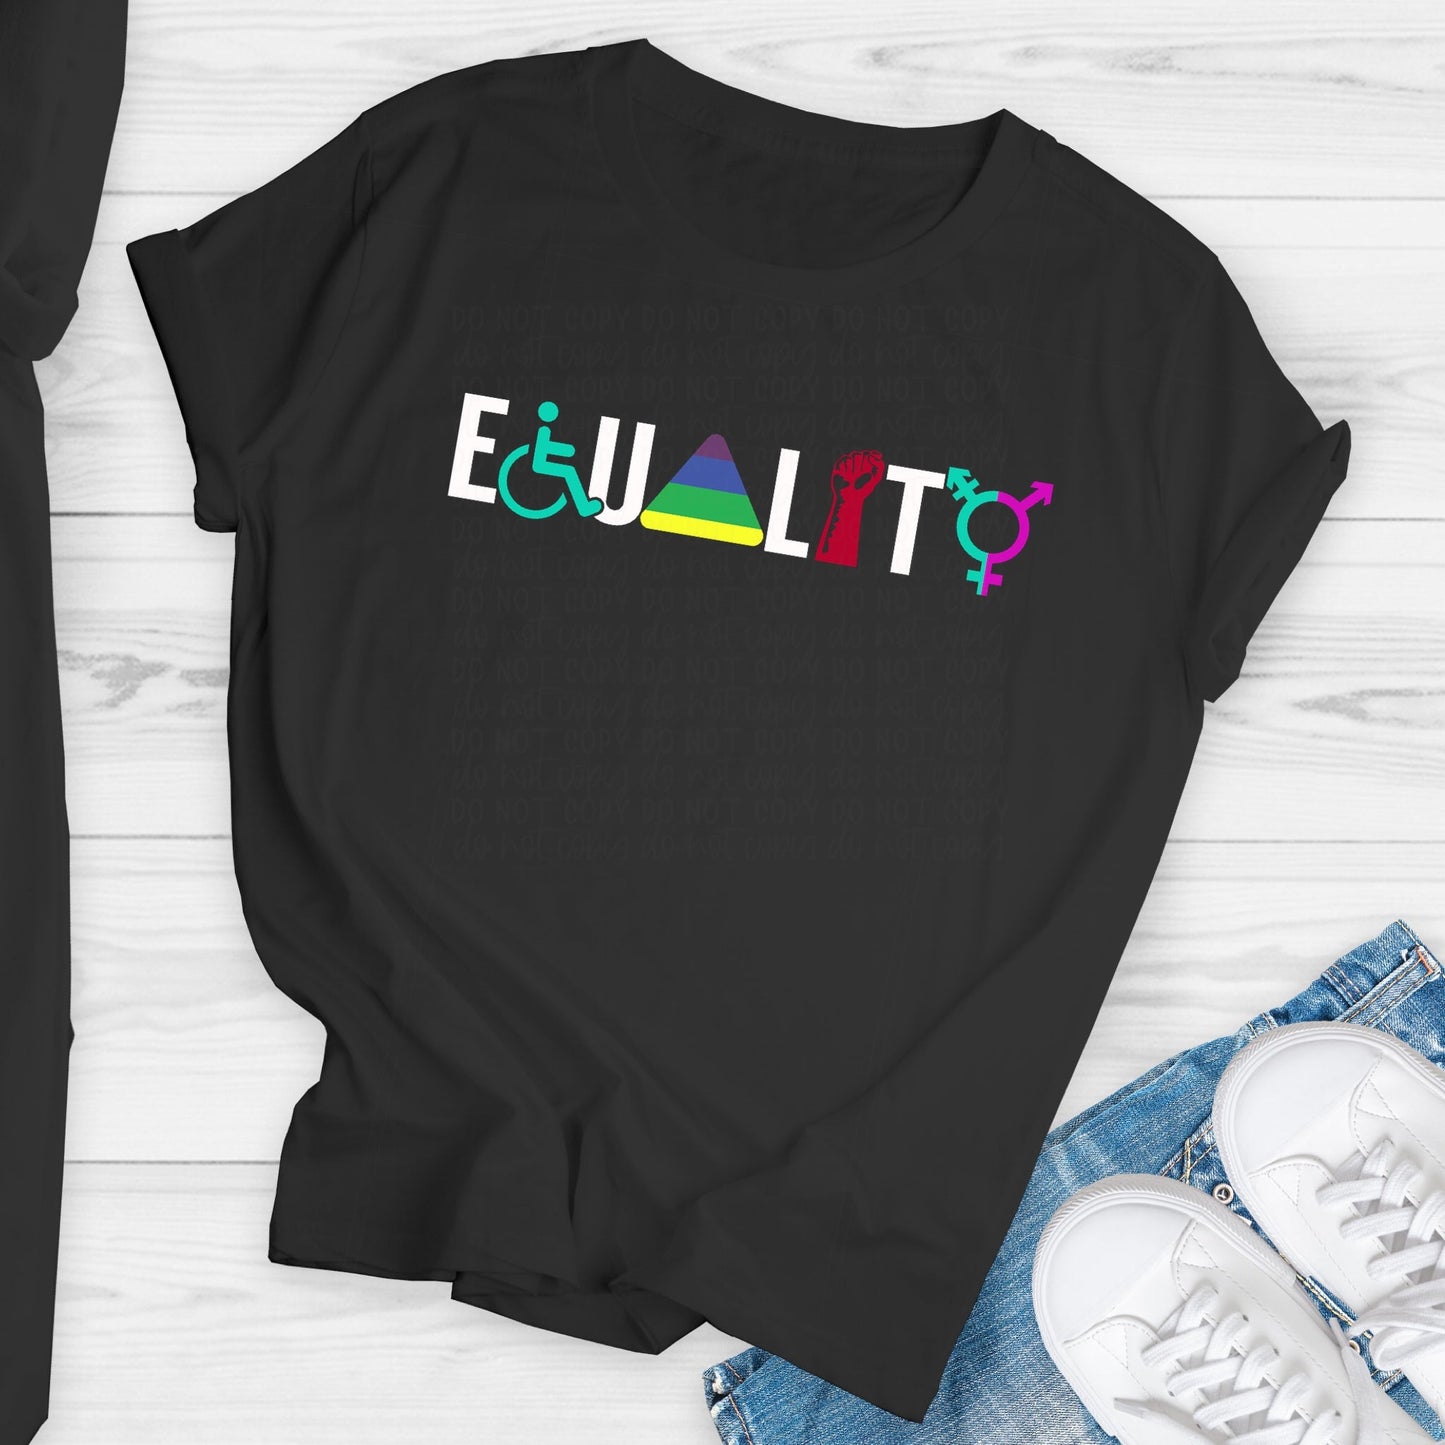 Equality Black Tee (Youth/Toddler/Infant)